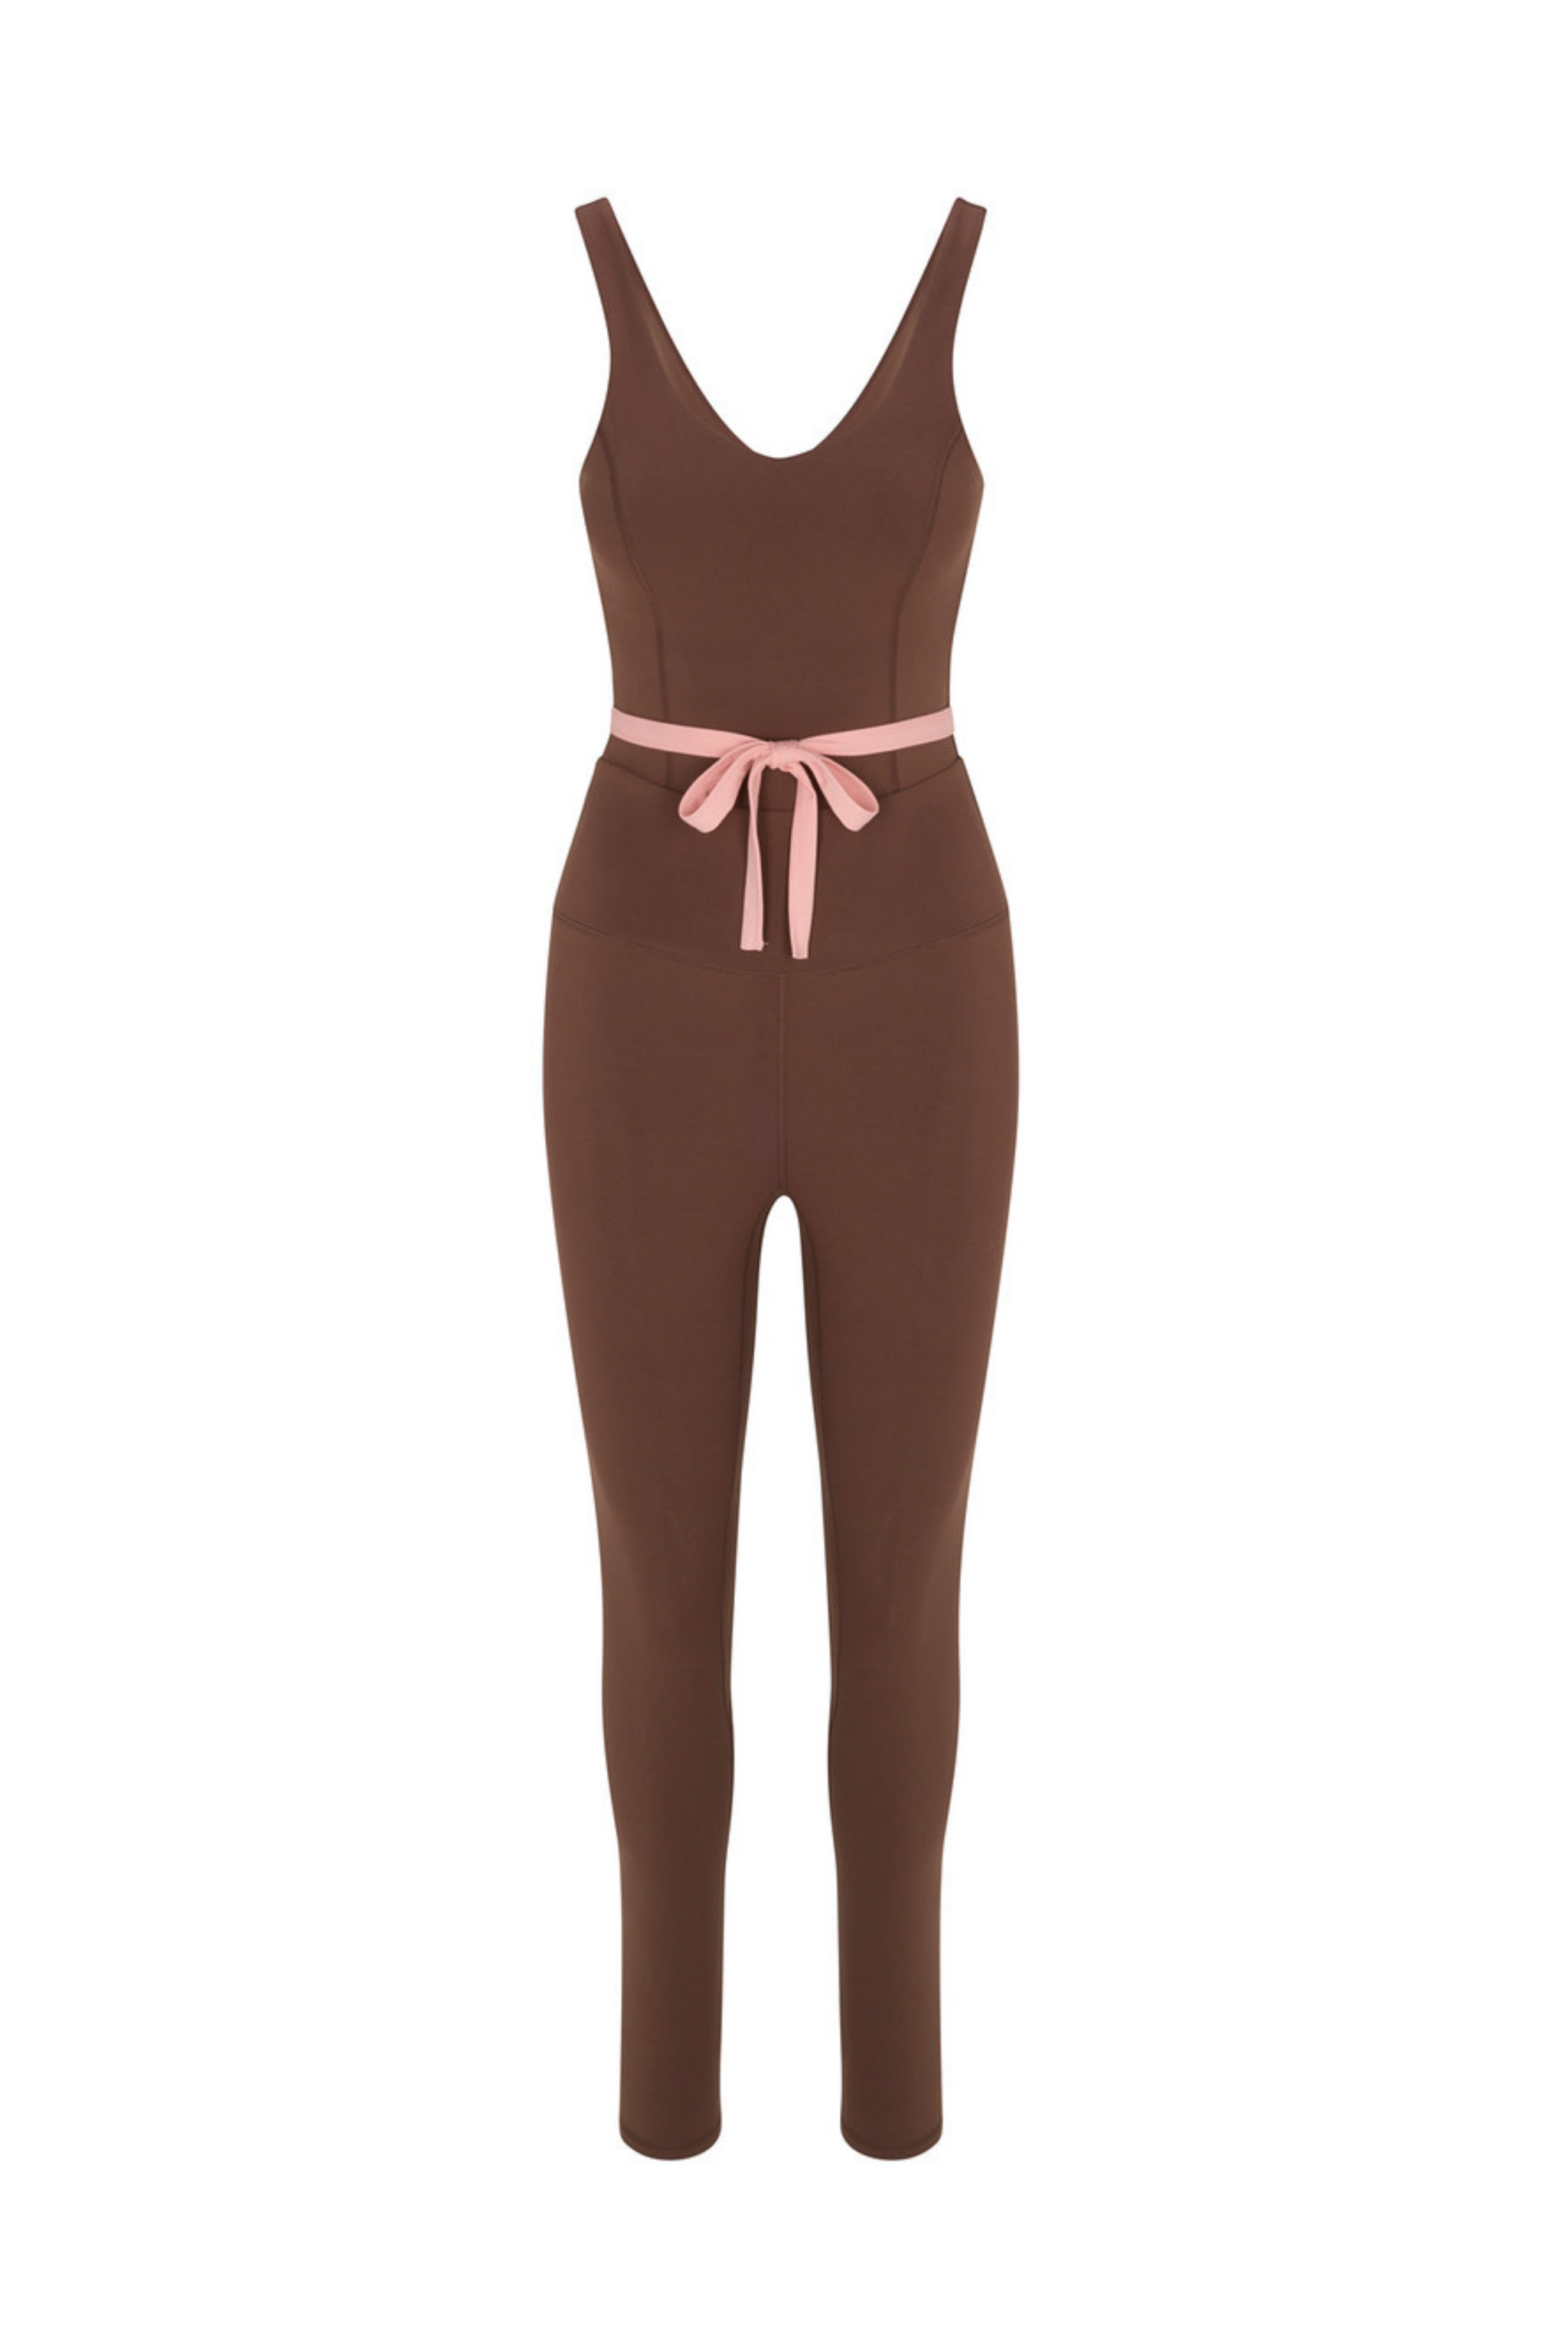 Fawn Jumpsuit with bow